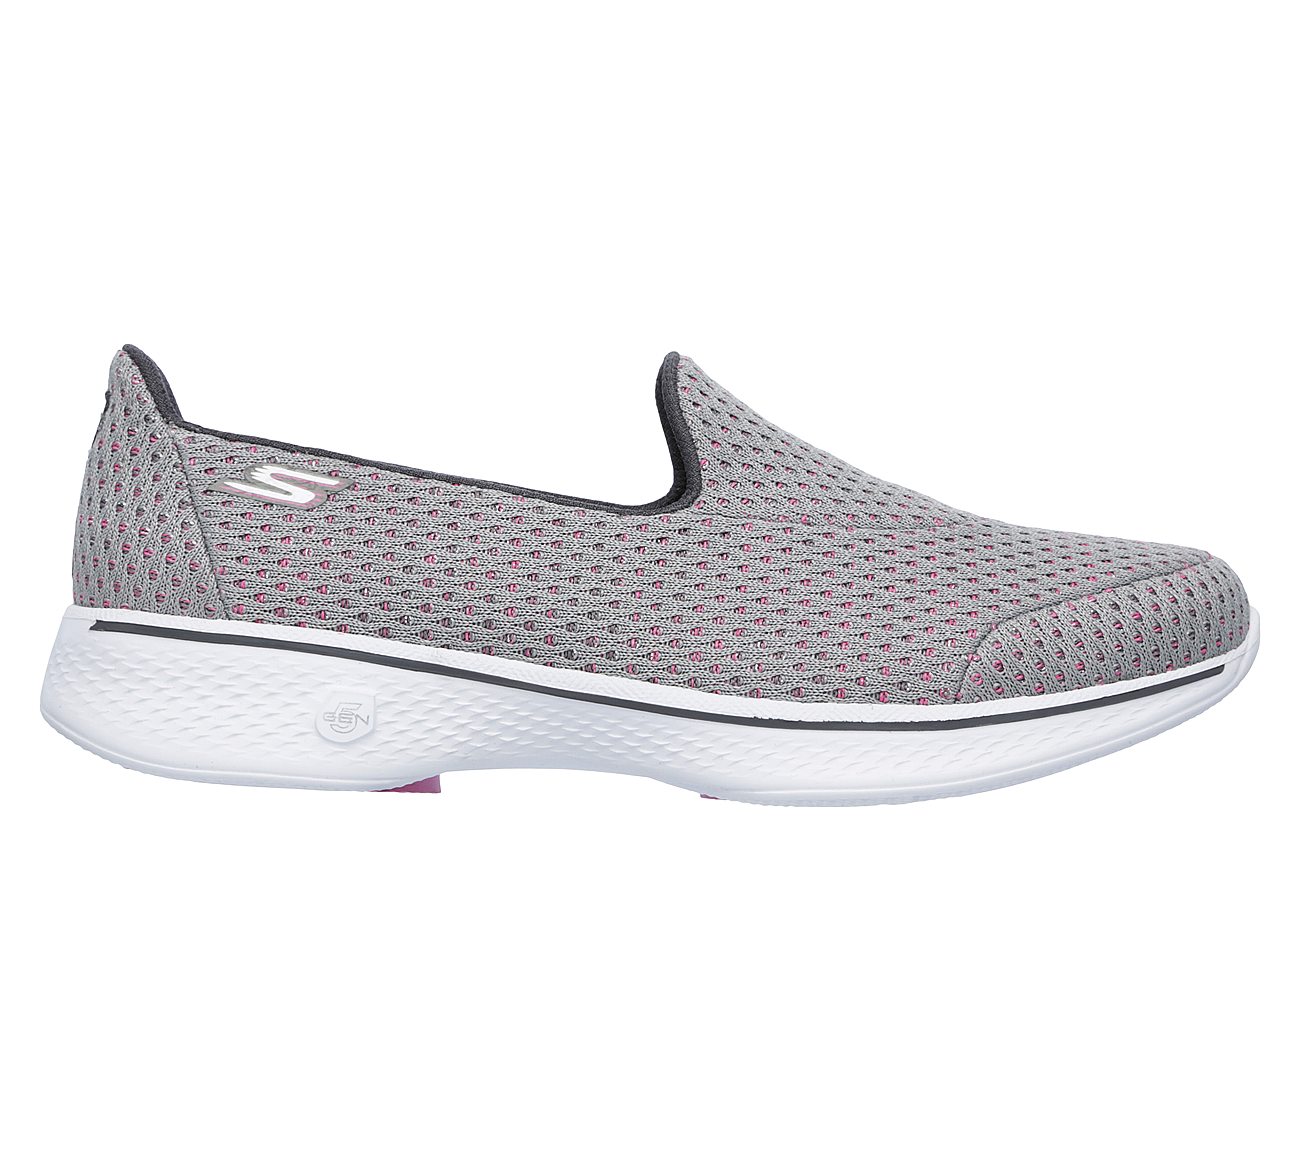 skechers breast cancer shoes